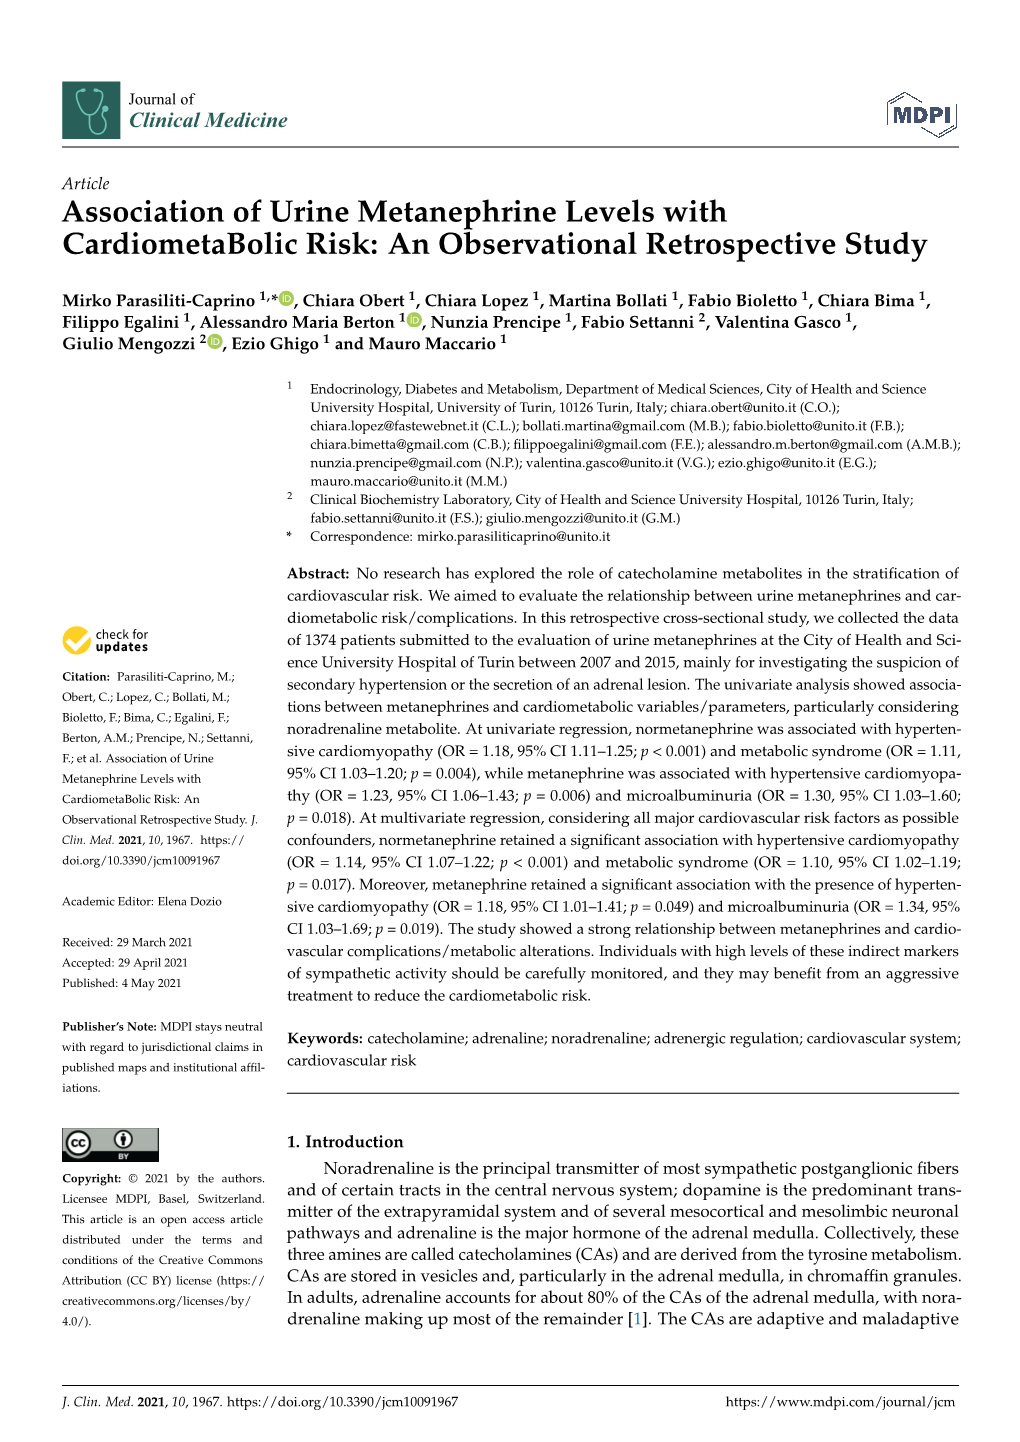 Association of Urine Metanephrine Levels with Cardiometabolic Risk: an Observational Retrospective Study